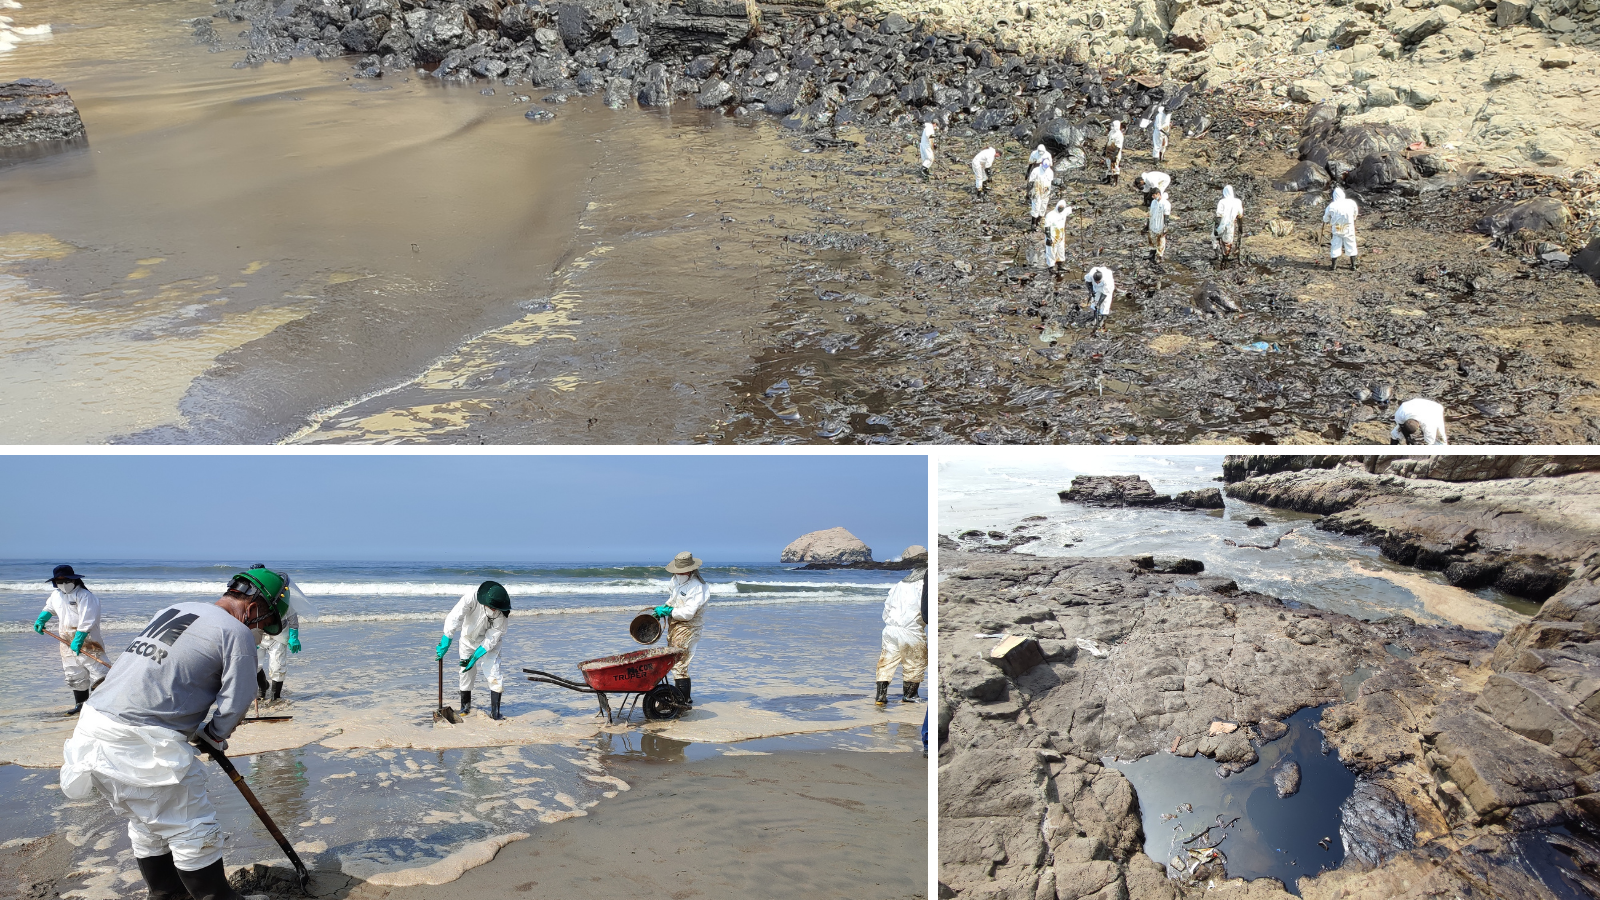 Images of oil spill in Peru